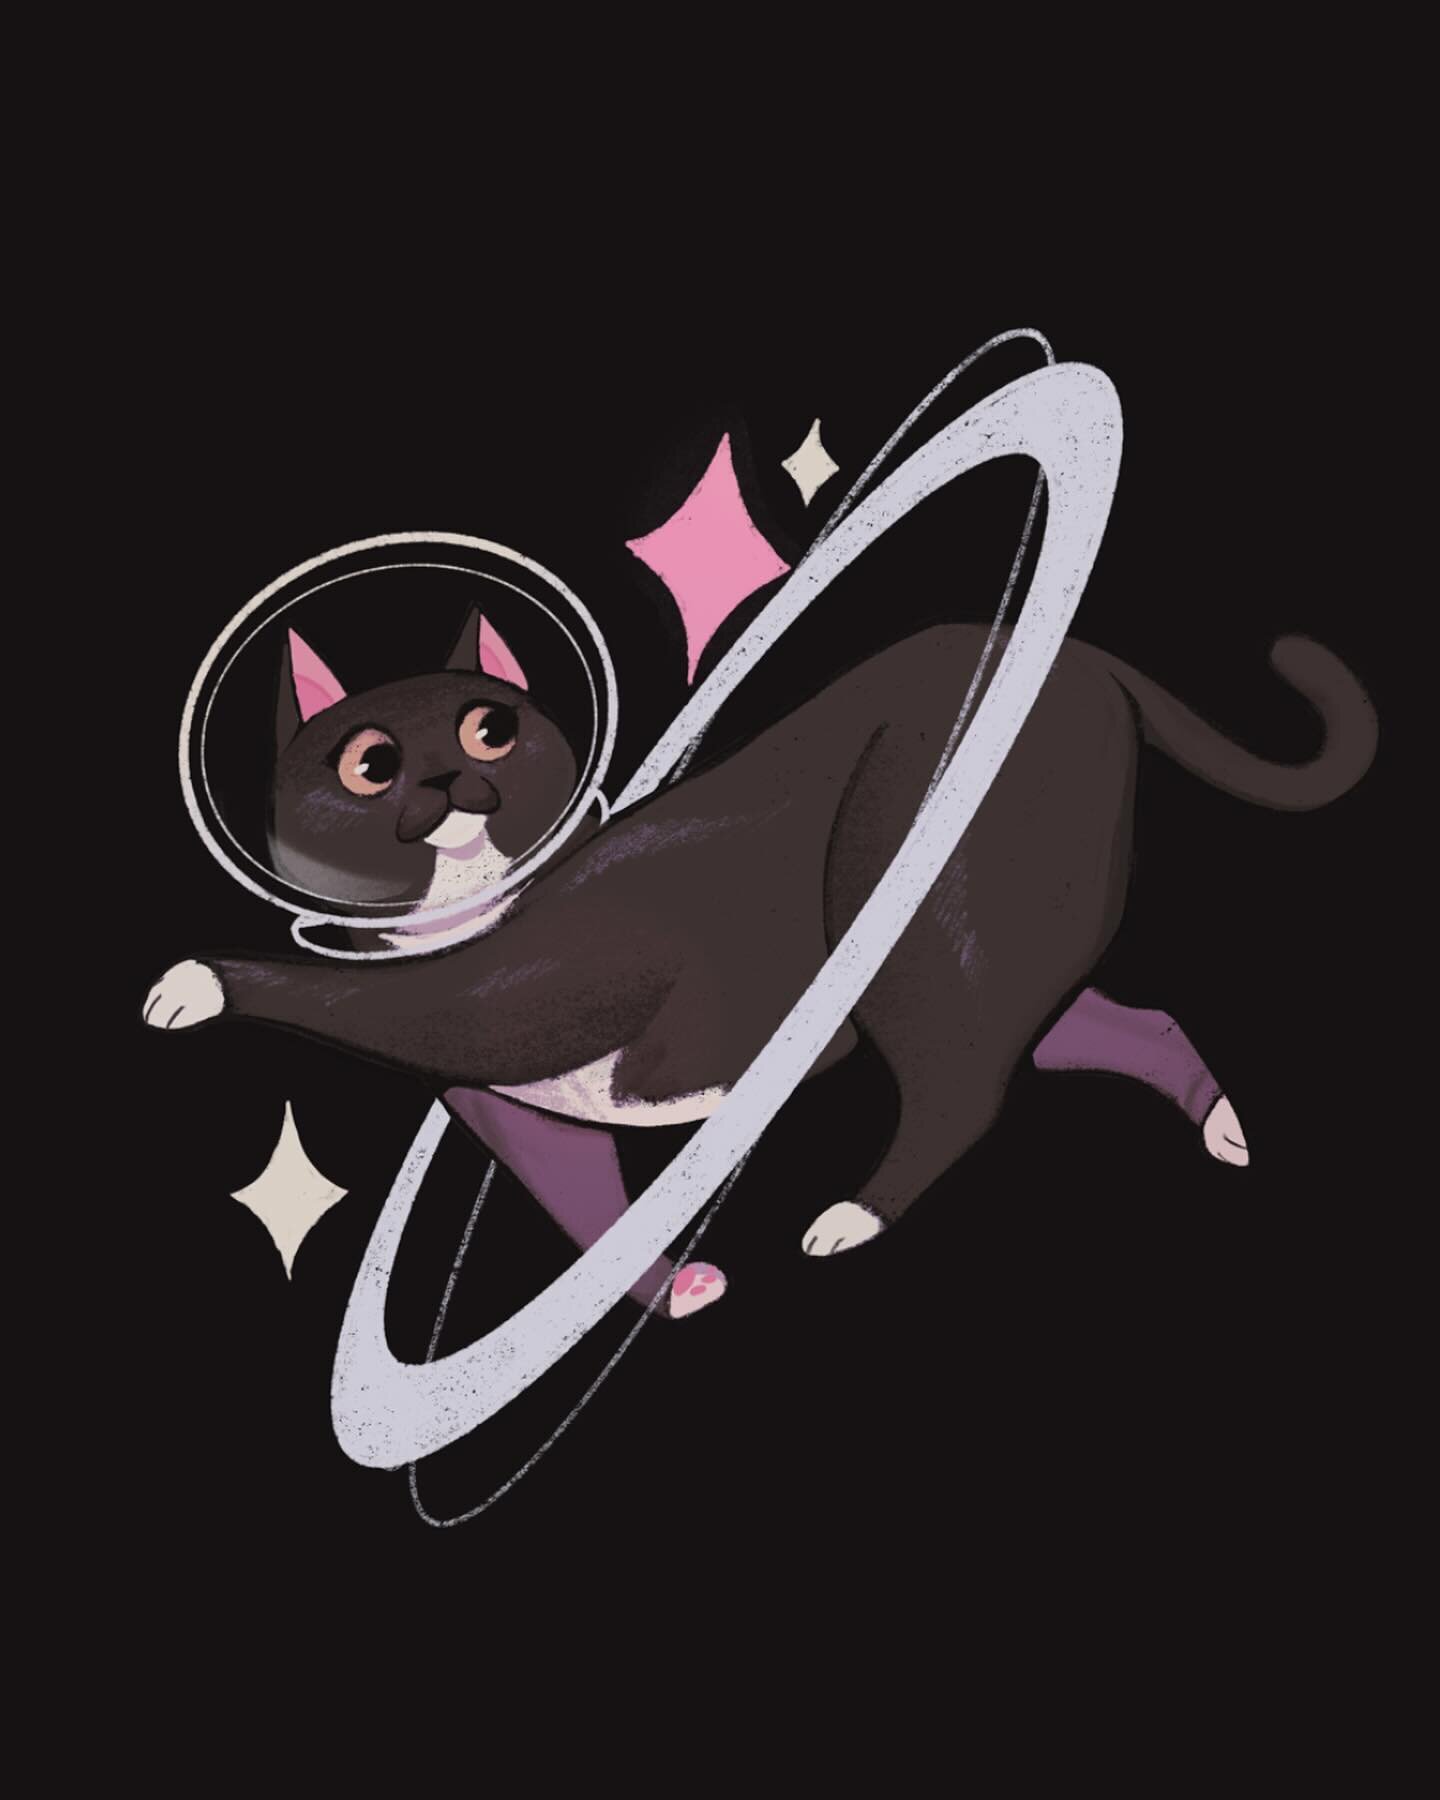 Working on some new merch ideas and decided why not include my cat, Talena ✨

#illustration #characterdesign #cats #catart #space #art #digitalart #noai #cutecat #spaceart